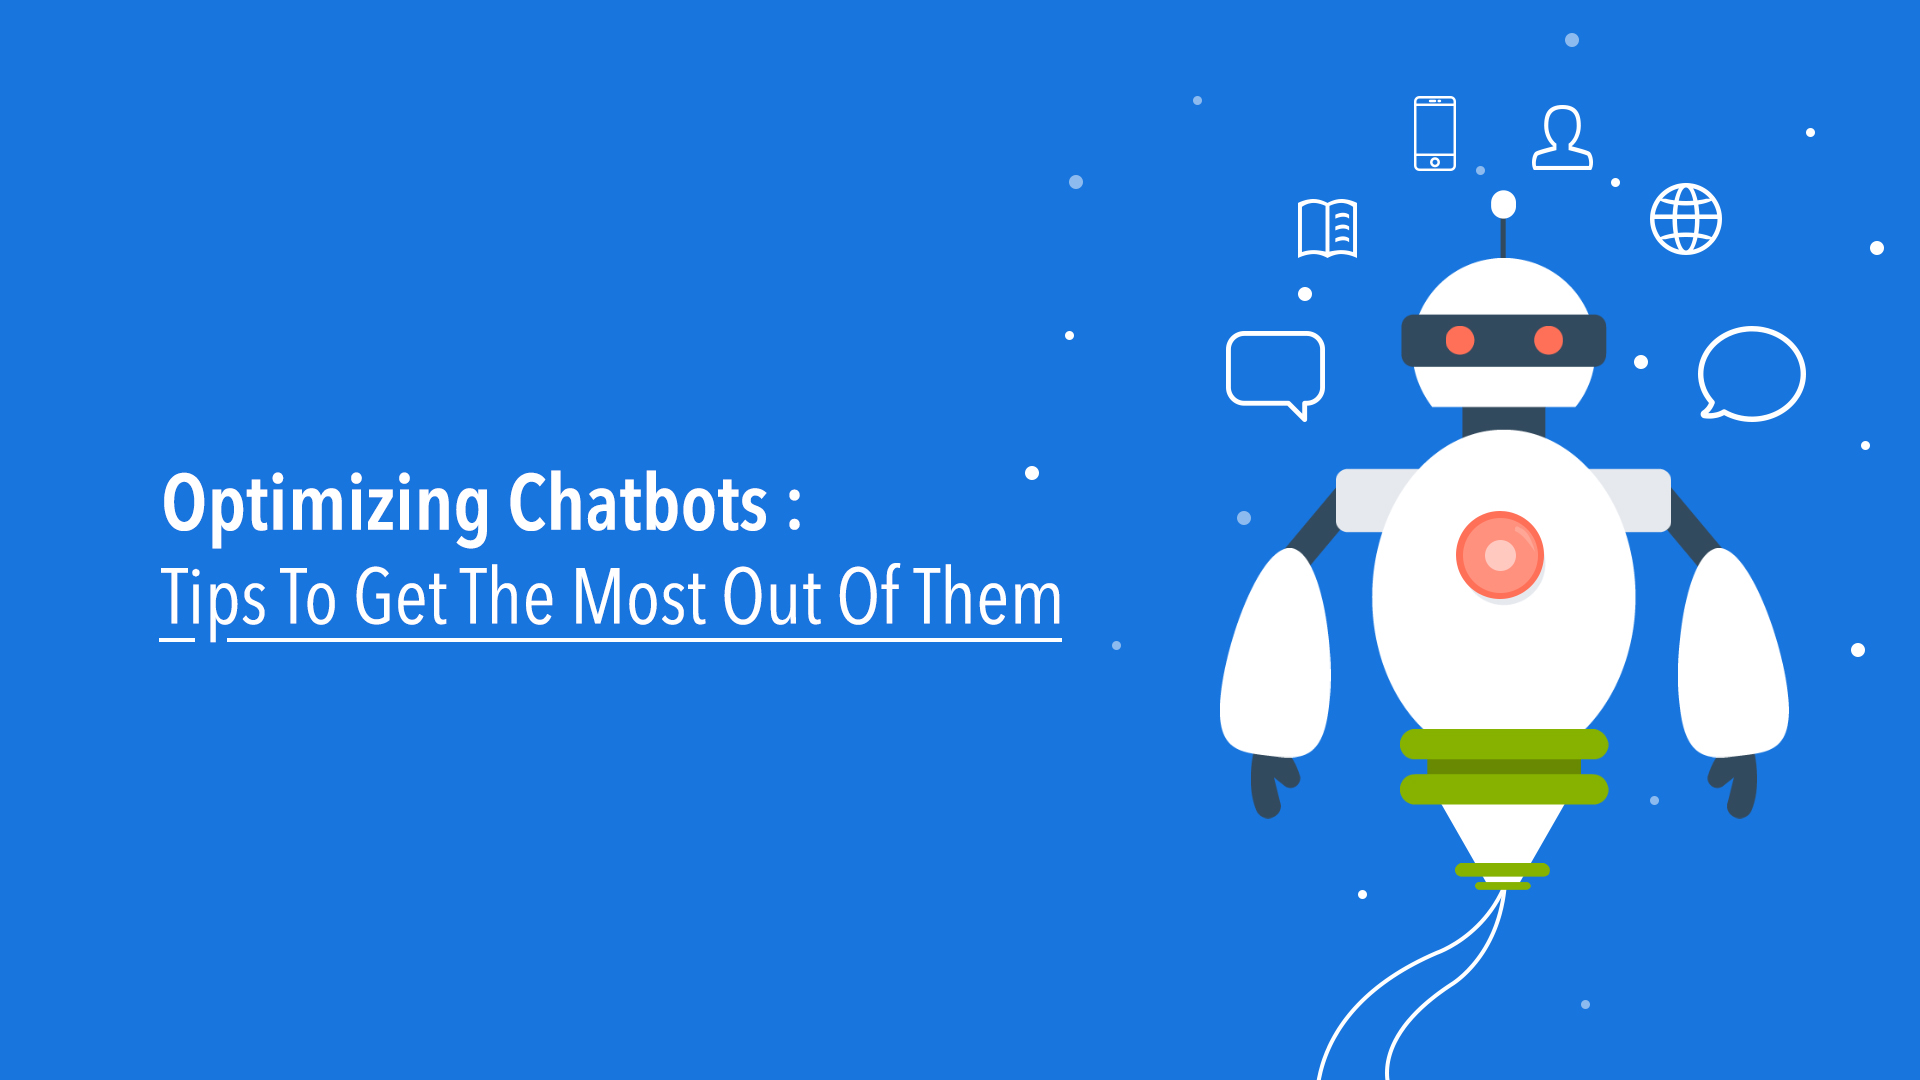 Optimizing Chatbots: 14 Tips To Get The Most Out Of Them